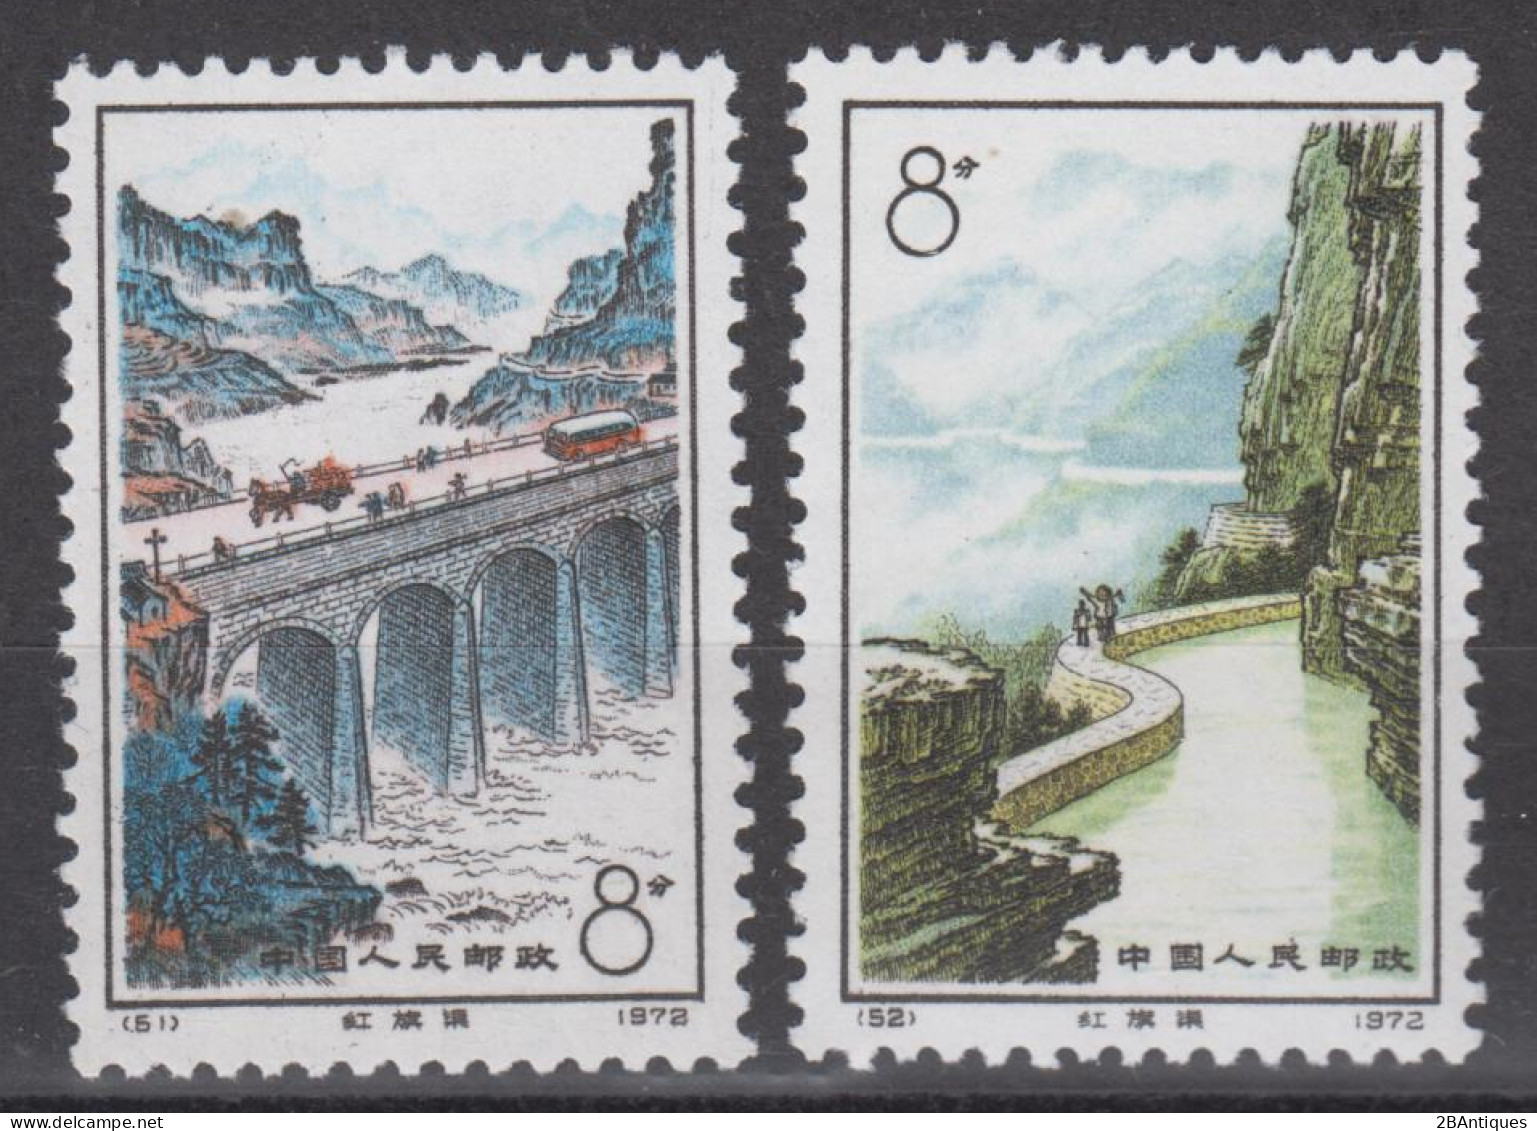 PR CHINA 1972 - Construction Of Red Flag Canal MNH** - Unused Stamps